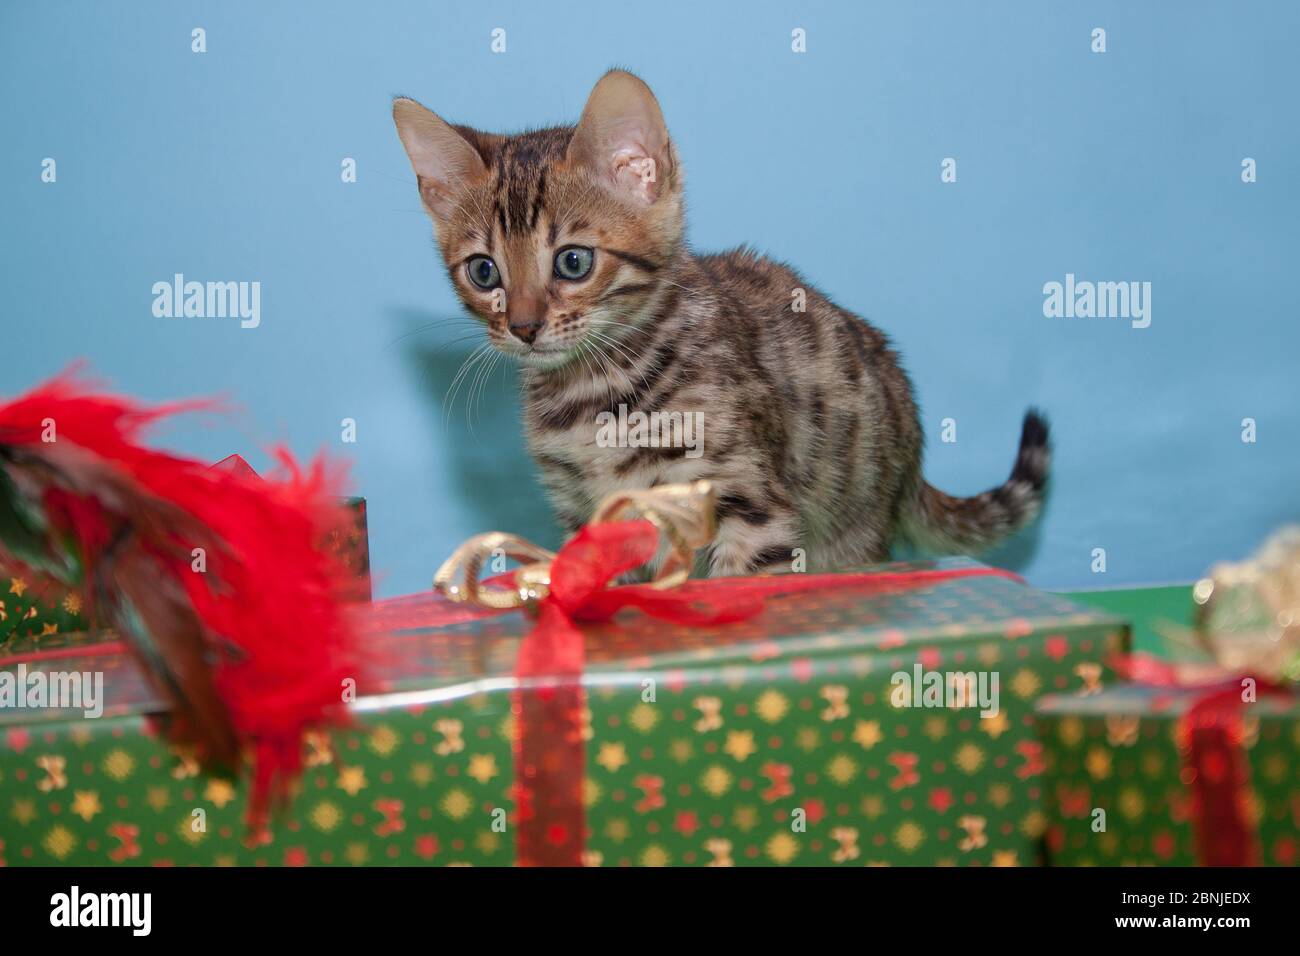 Cute bengal kitten is sitting near the festive's gifts. Pet animals. One month old. Stock Photo